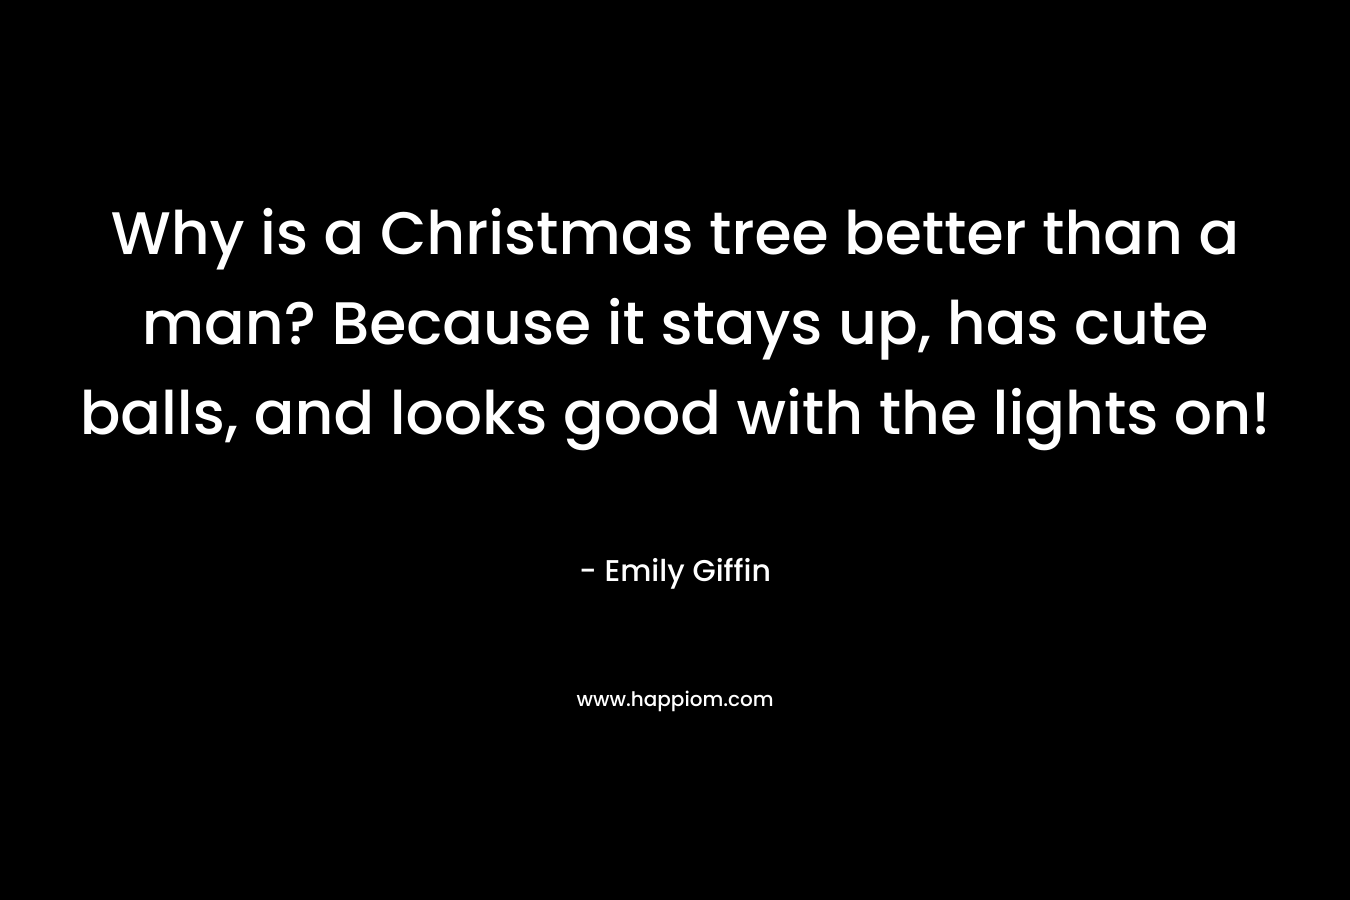 Why is a Christmas tree better than a man? Because it stays up, has cute balls, and looks good with the lights on! – Emily Giffin